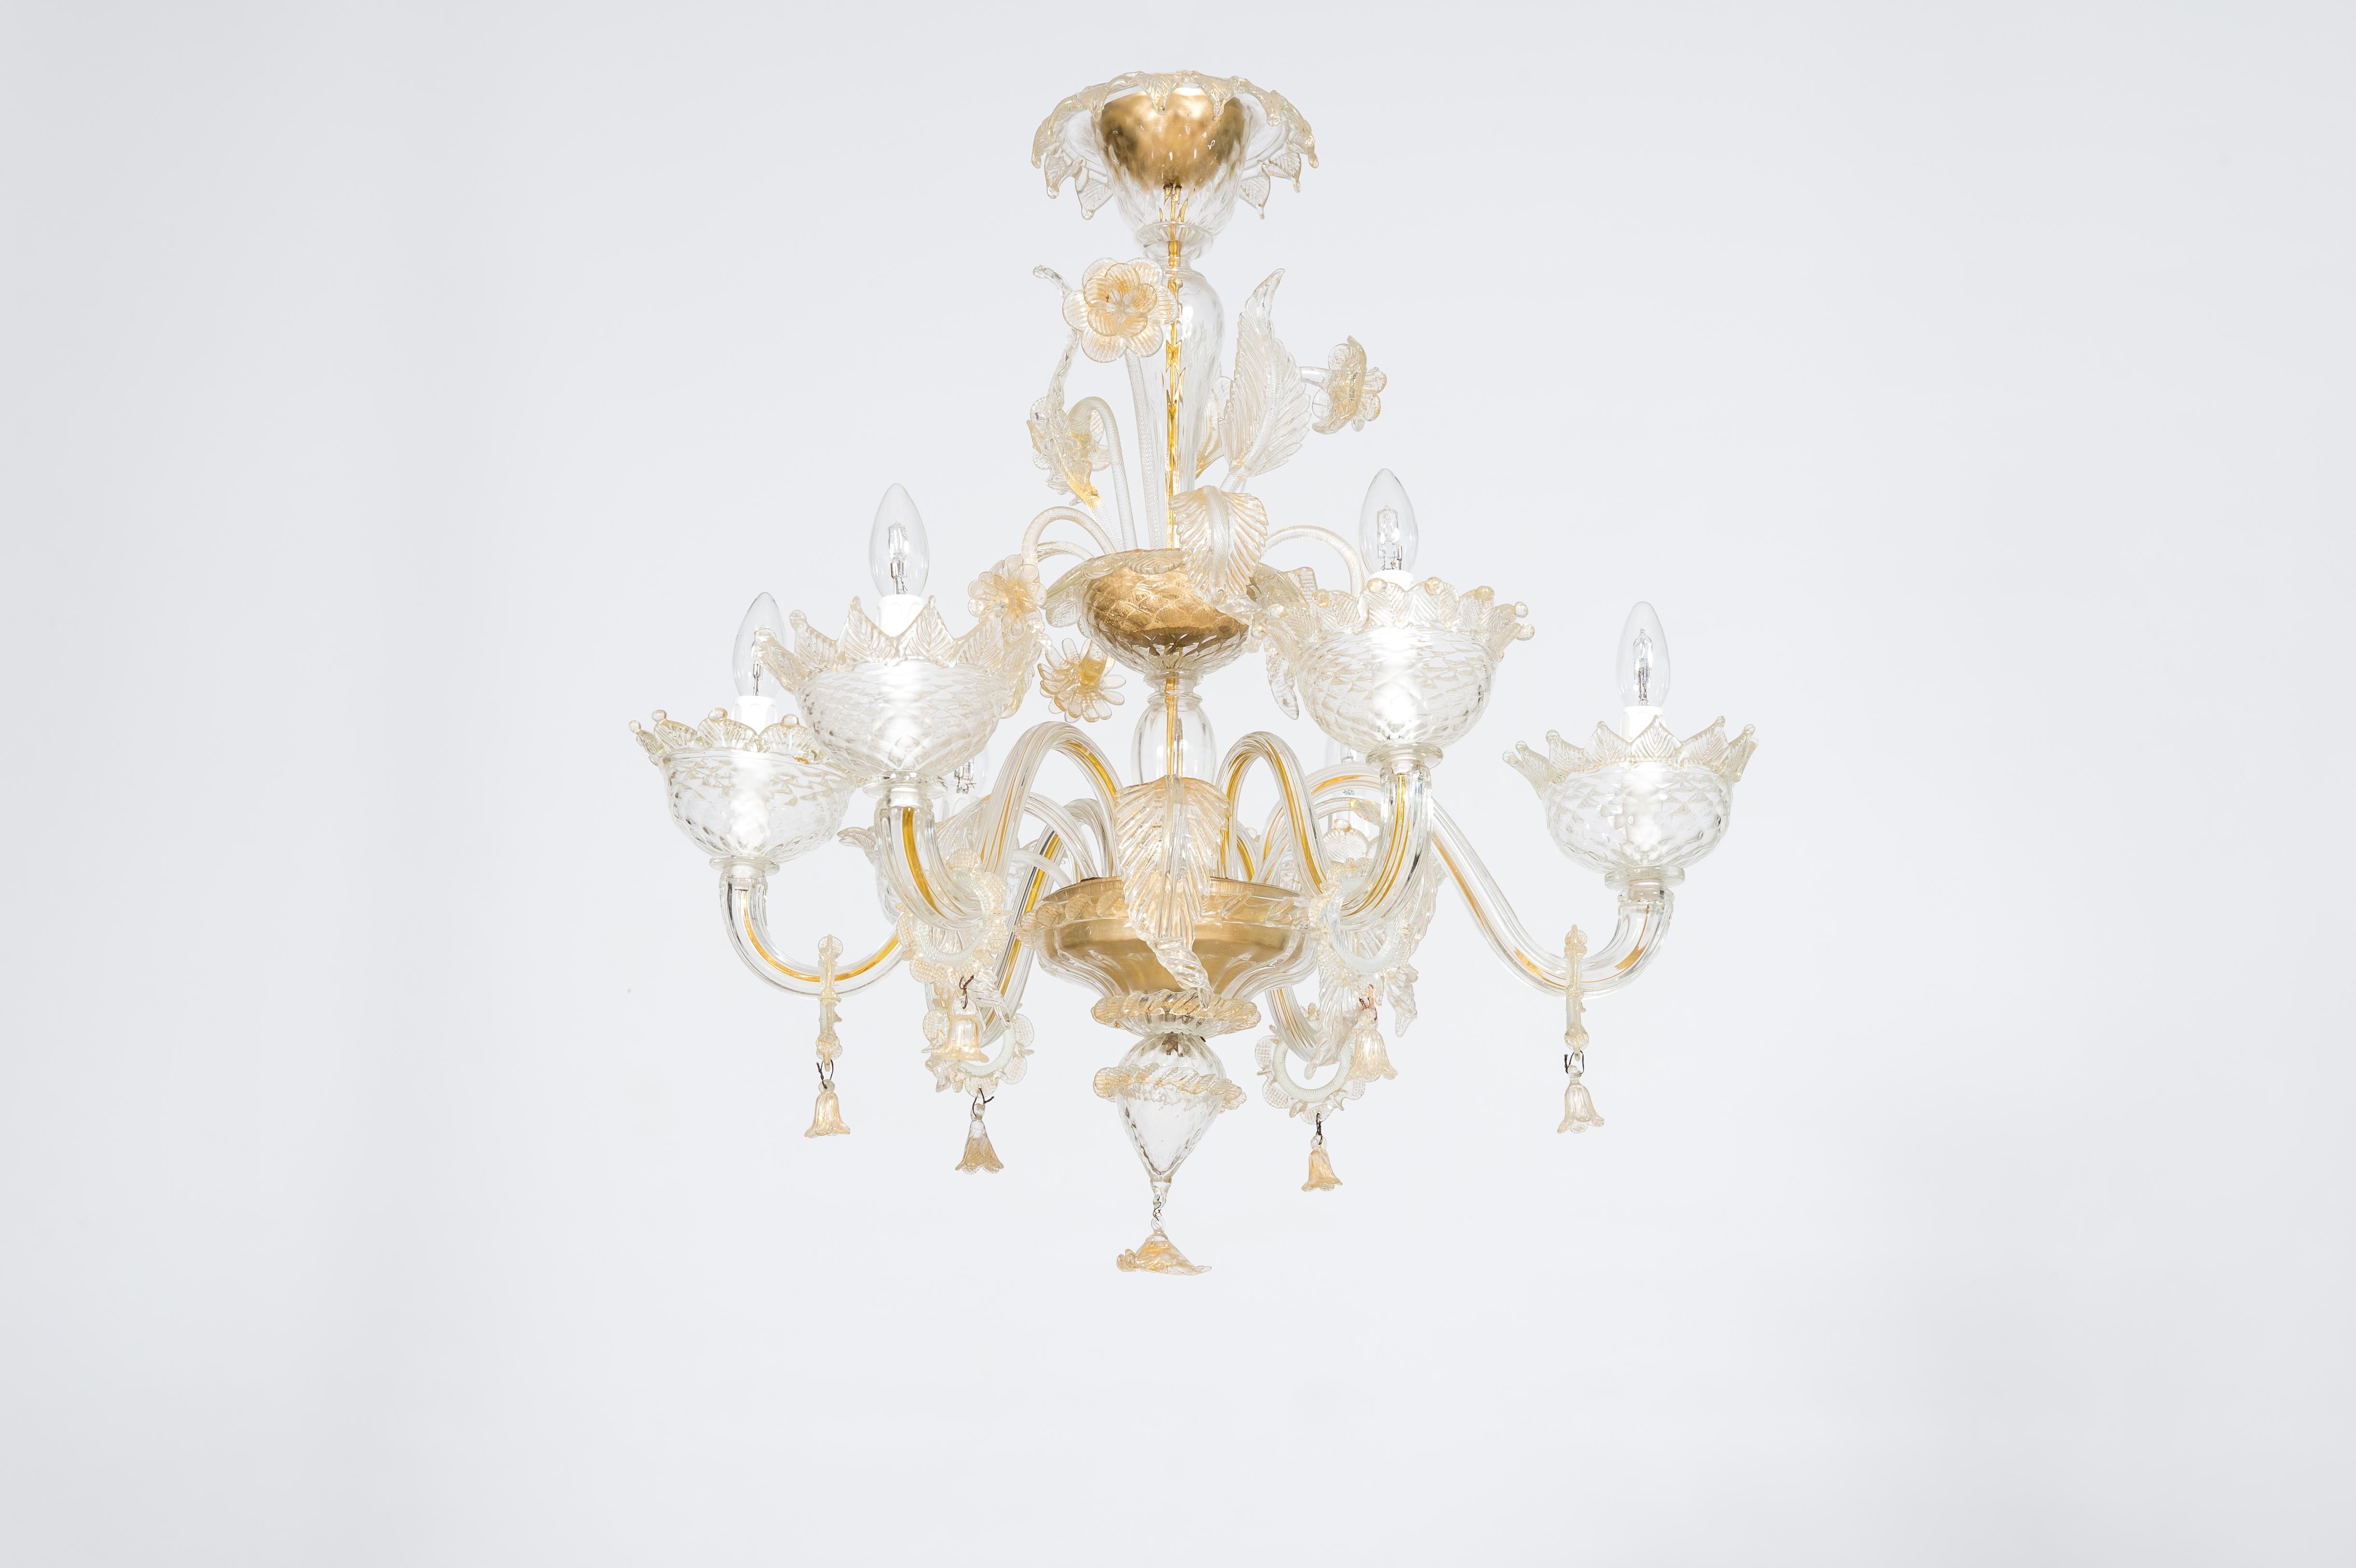 Modern Golden Murano Glass Chandelier with “Vere” Decorations, 20th Century, Italy For Sale